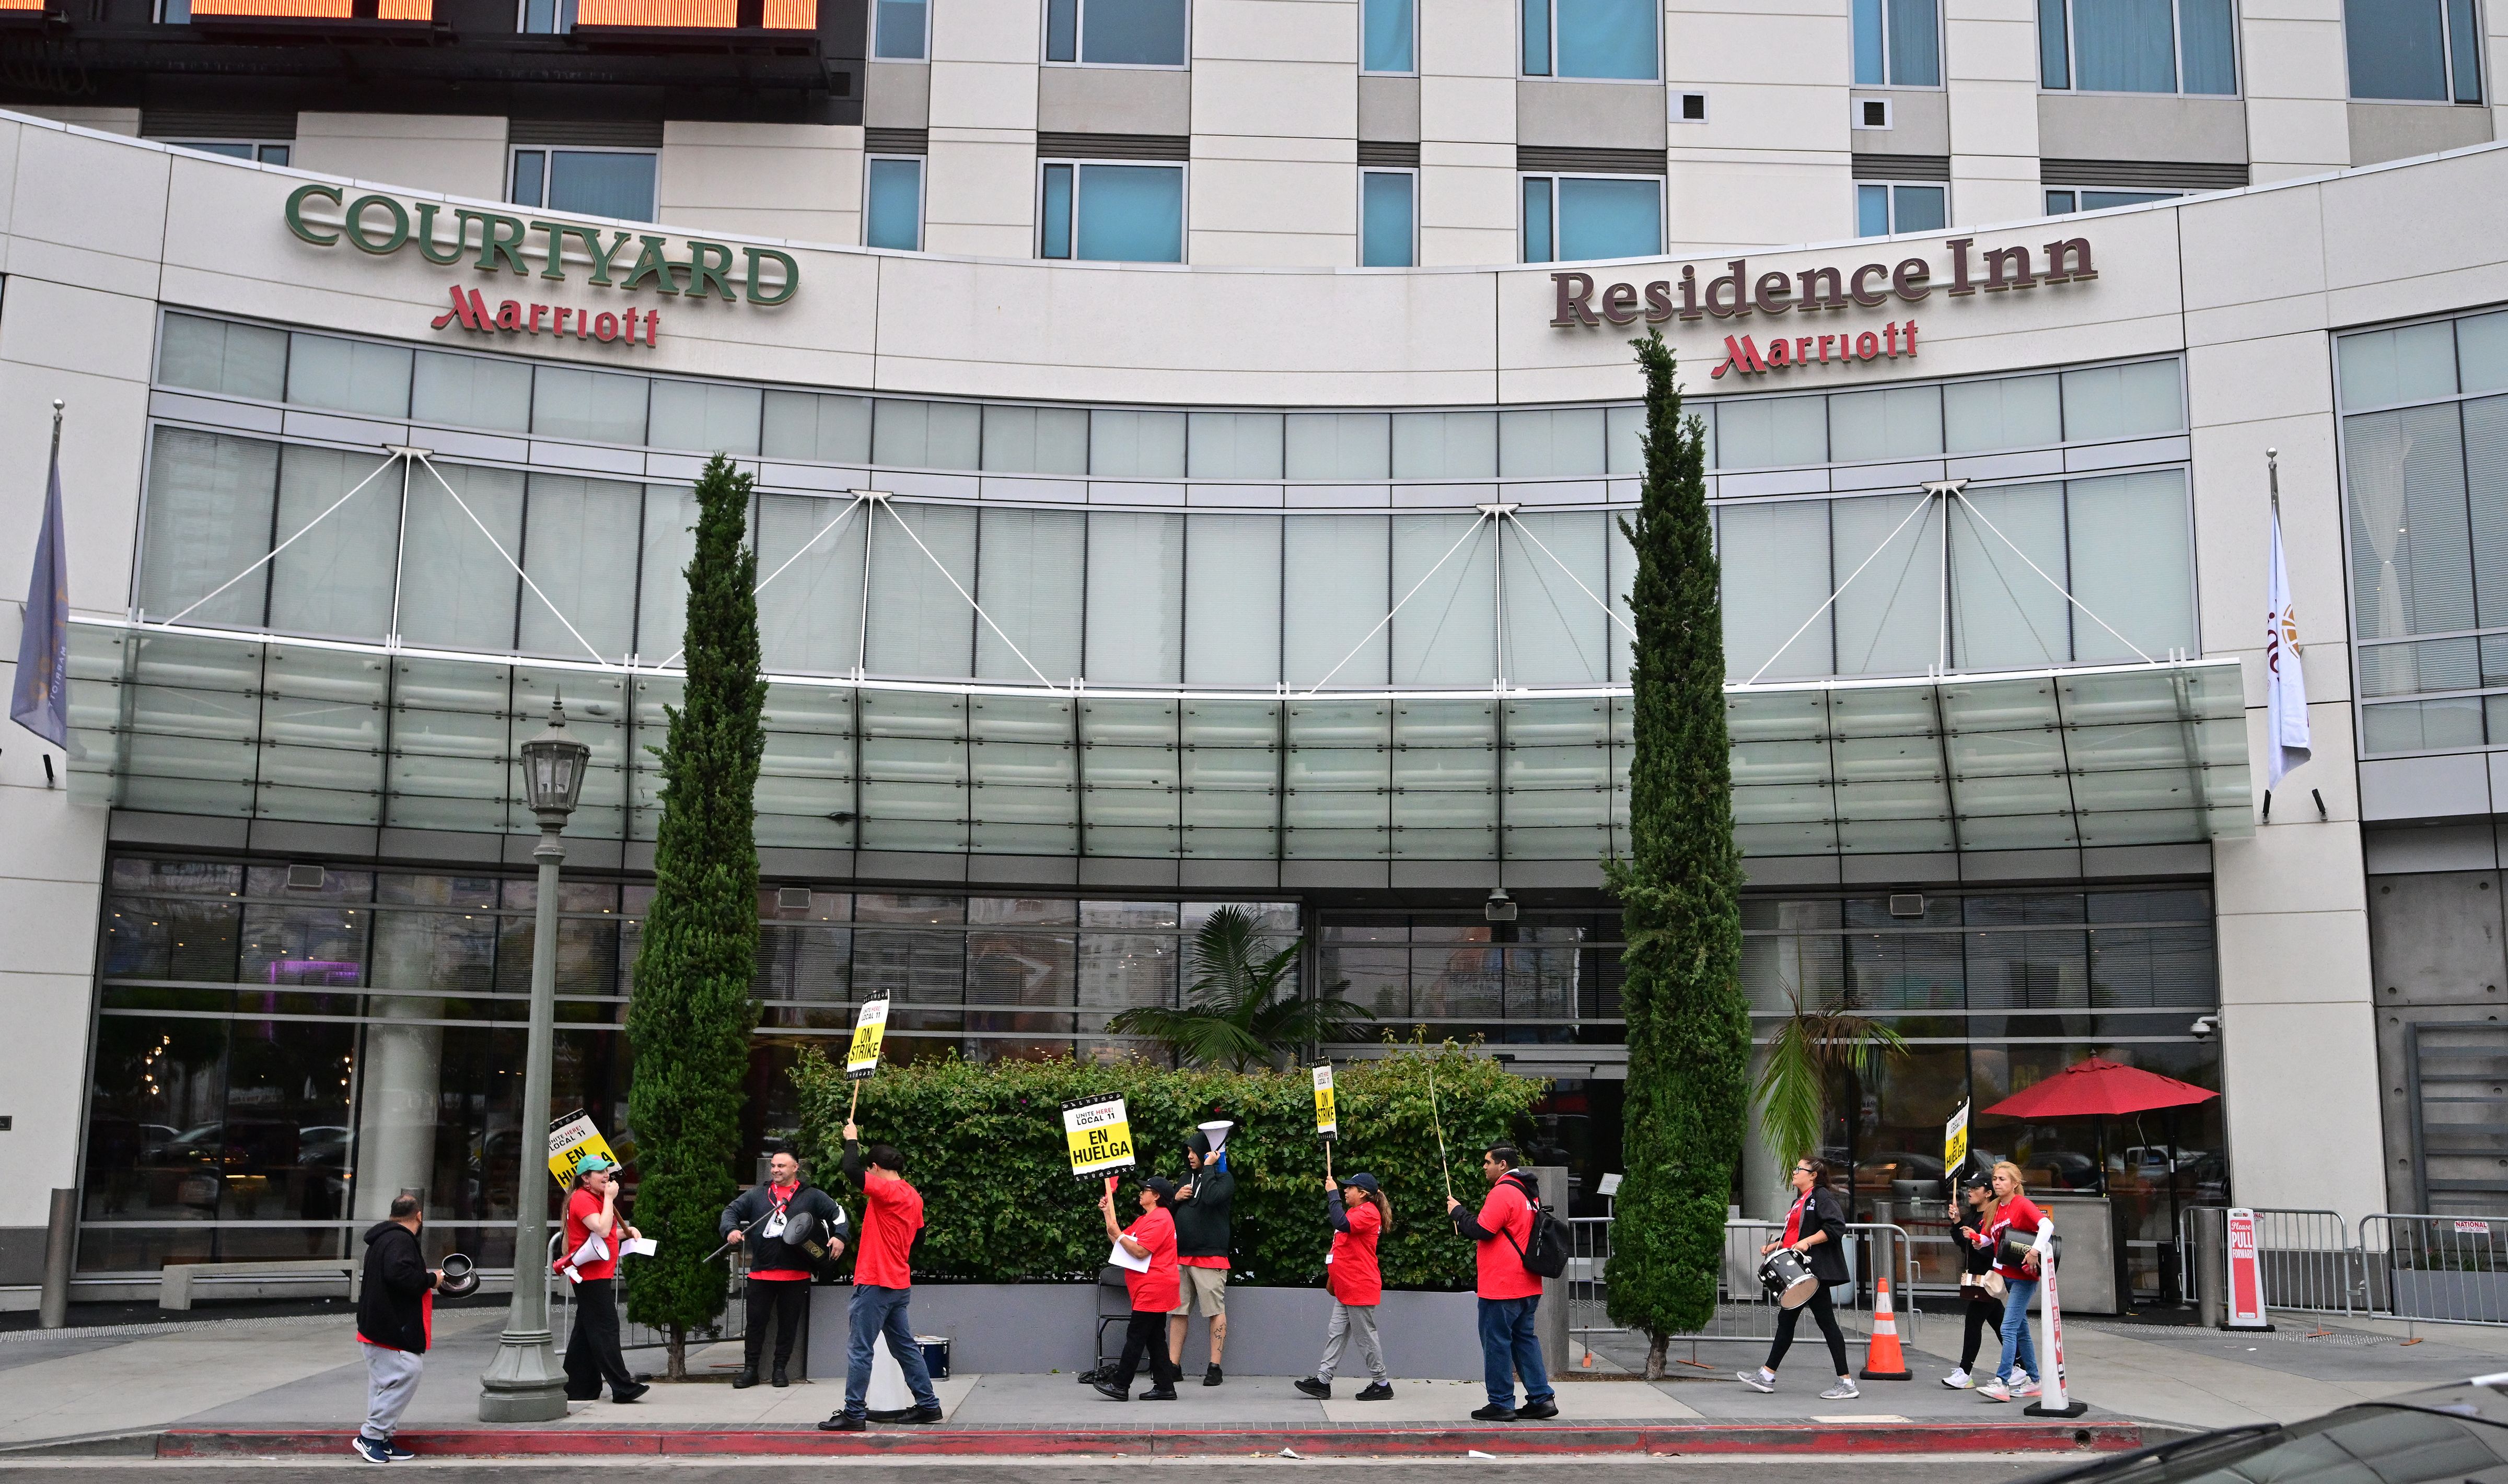 Hotel workers hold placards during the second day on their strike for a better wage in front of the Courtyard Marriot Hotel on July 3, 2023 in Los Angeles, California. Contracts between UNITE HERE Local 11 and 61 hotels expired at midnight on Friday, June 30. (Photo by Frederic J. BROWN / AFP) (Photo by FREDERIC J. BROWN/AFP via Getty Images)